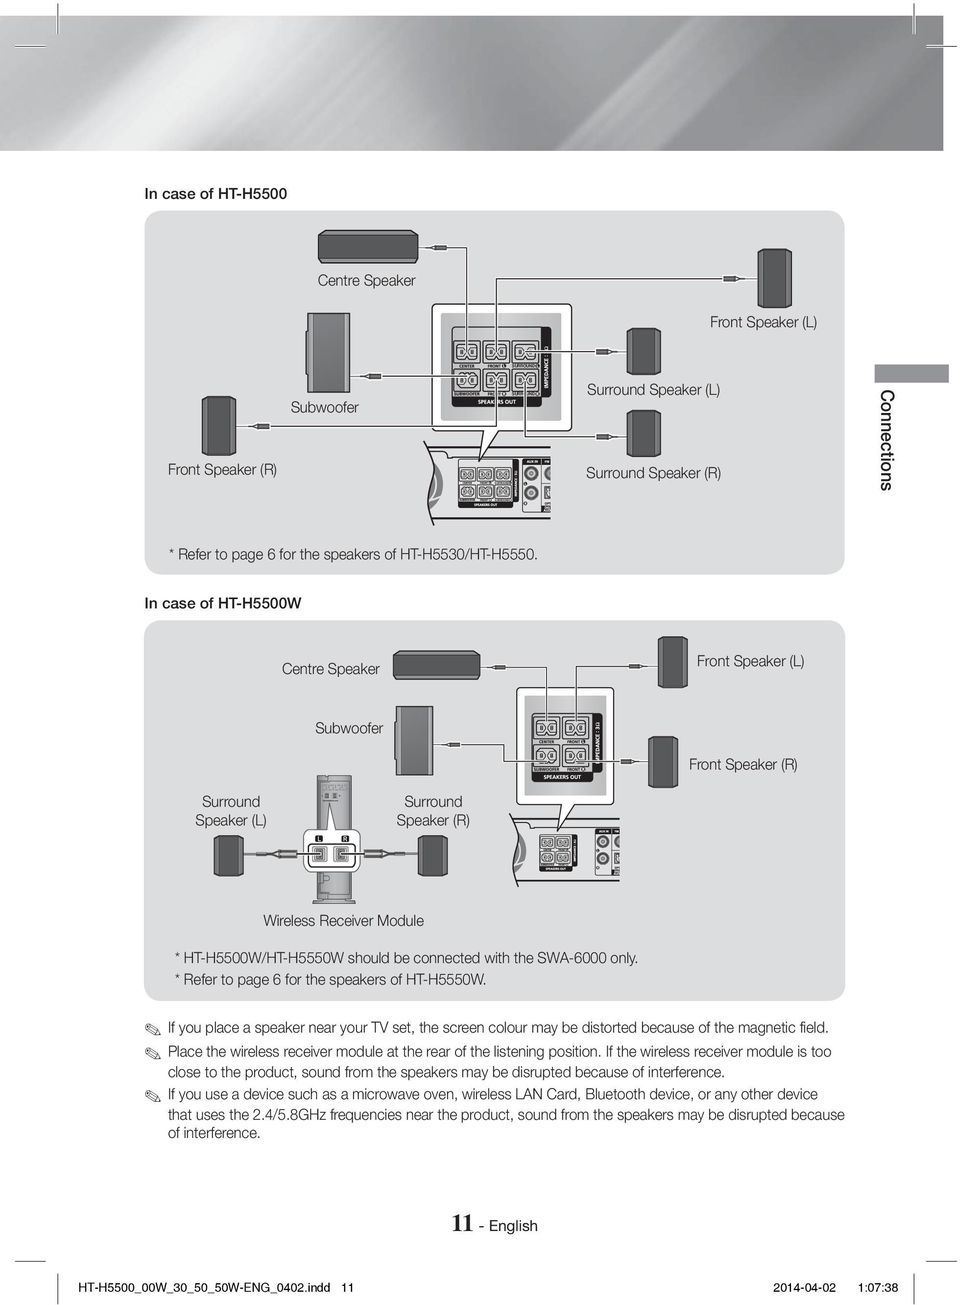 In case of HT-H5500W Centre Speaker Front Speaker (L) Subwoofer Front Speaker (R) Surround Speaker (L) Surround Speaker (R) Wireless Receiver Module * HT-H5500W/HT-H5550W should be connected with the